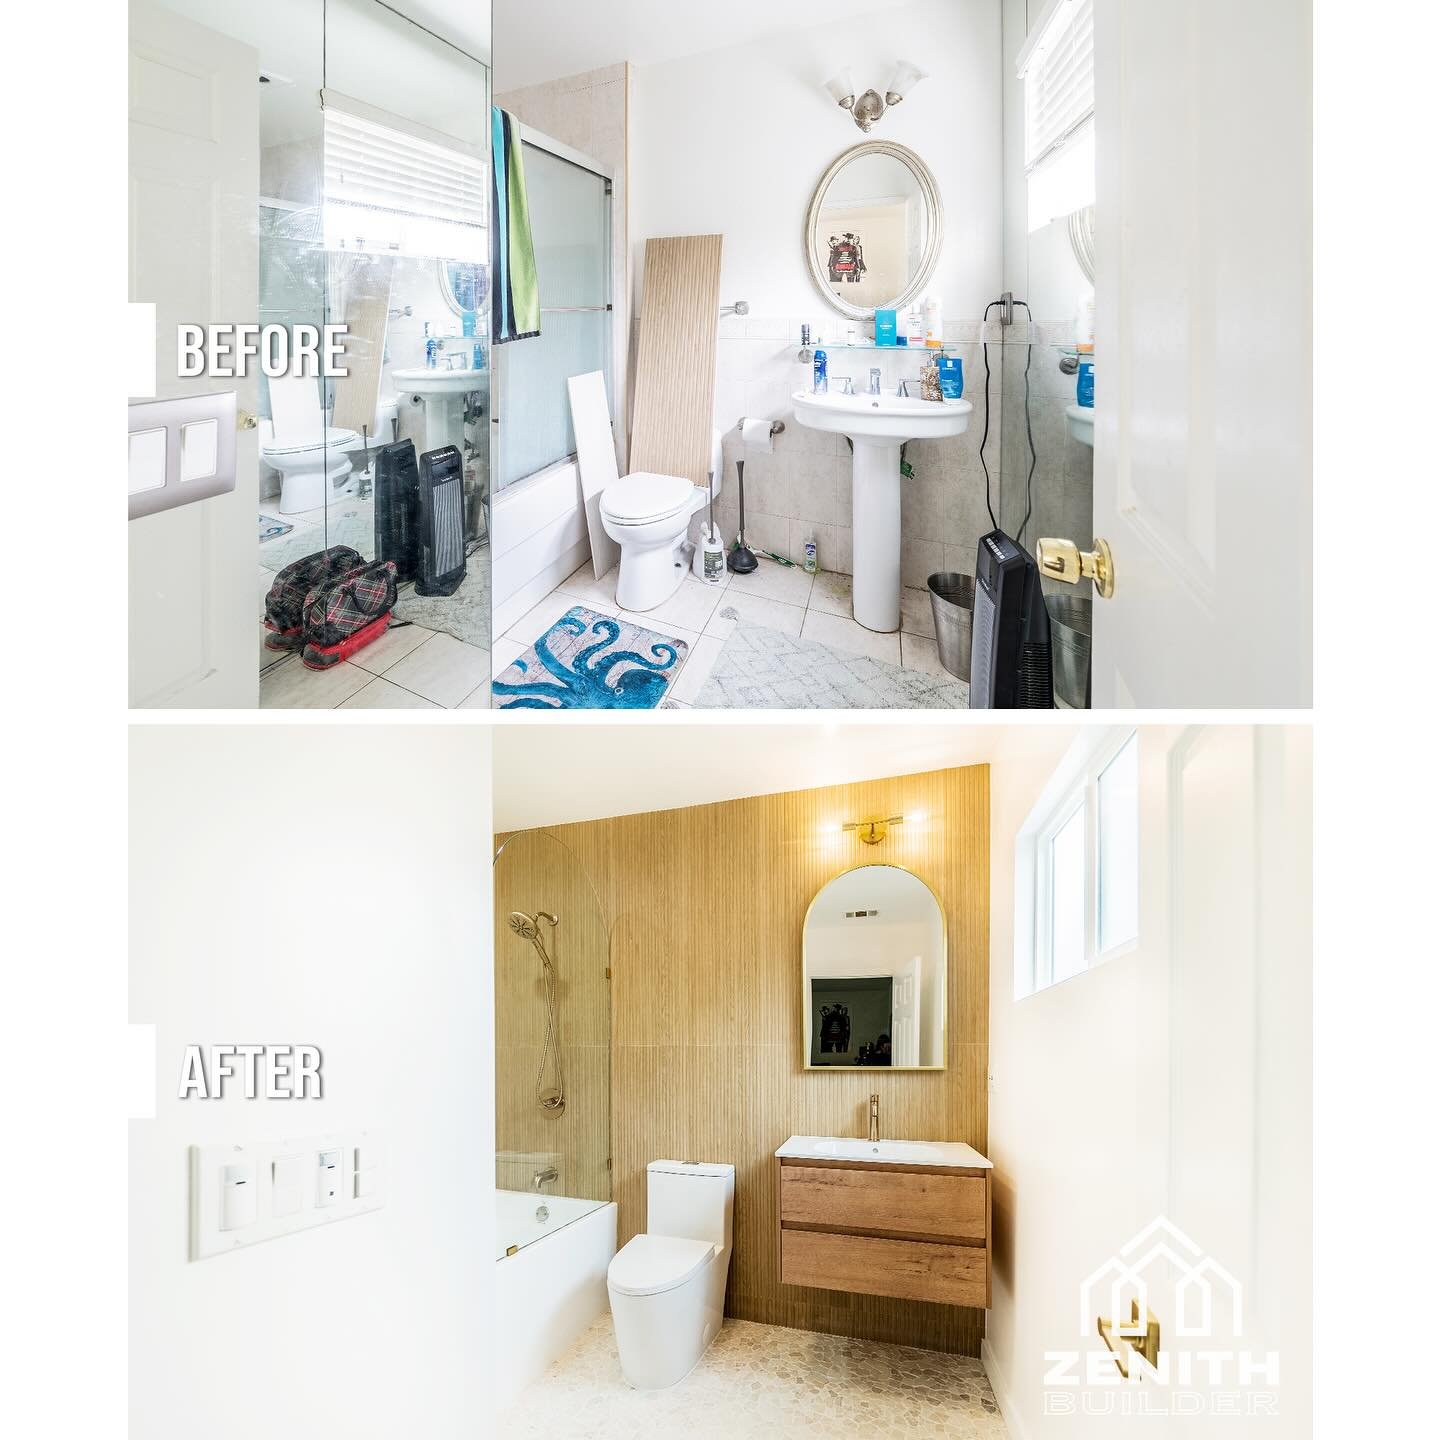 Embrace Serenity in Style

This bathroom remodel merges nature&rsquo;s calm with modern elegance. Imagine bamboo-inspired strip walls, a chic floating sink, a captivating glass-door bathtub, and a mosaic pebble floor. Elevate your sanctuary with us!